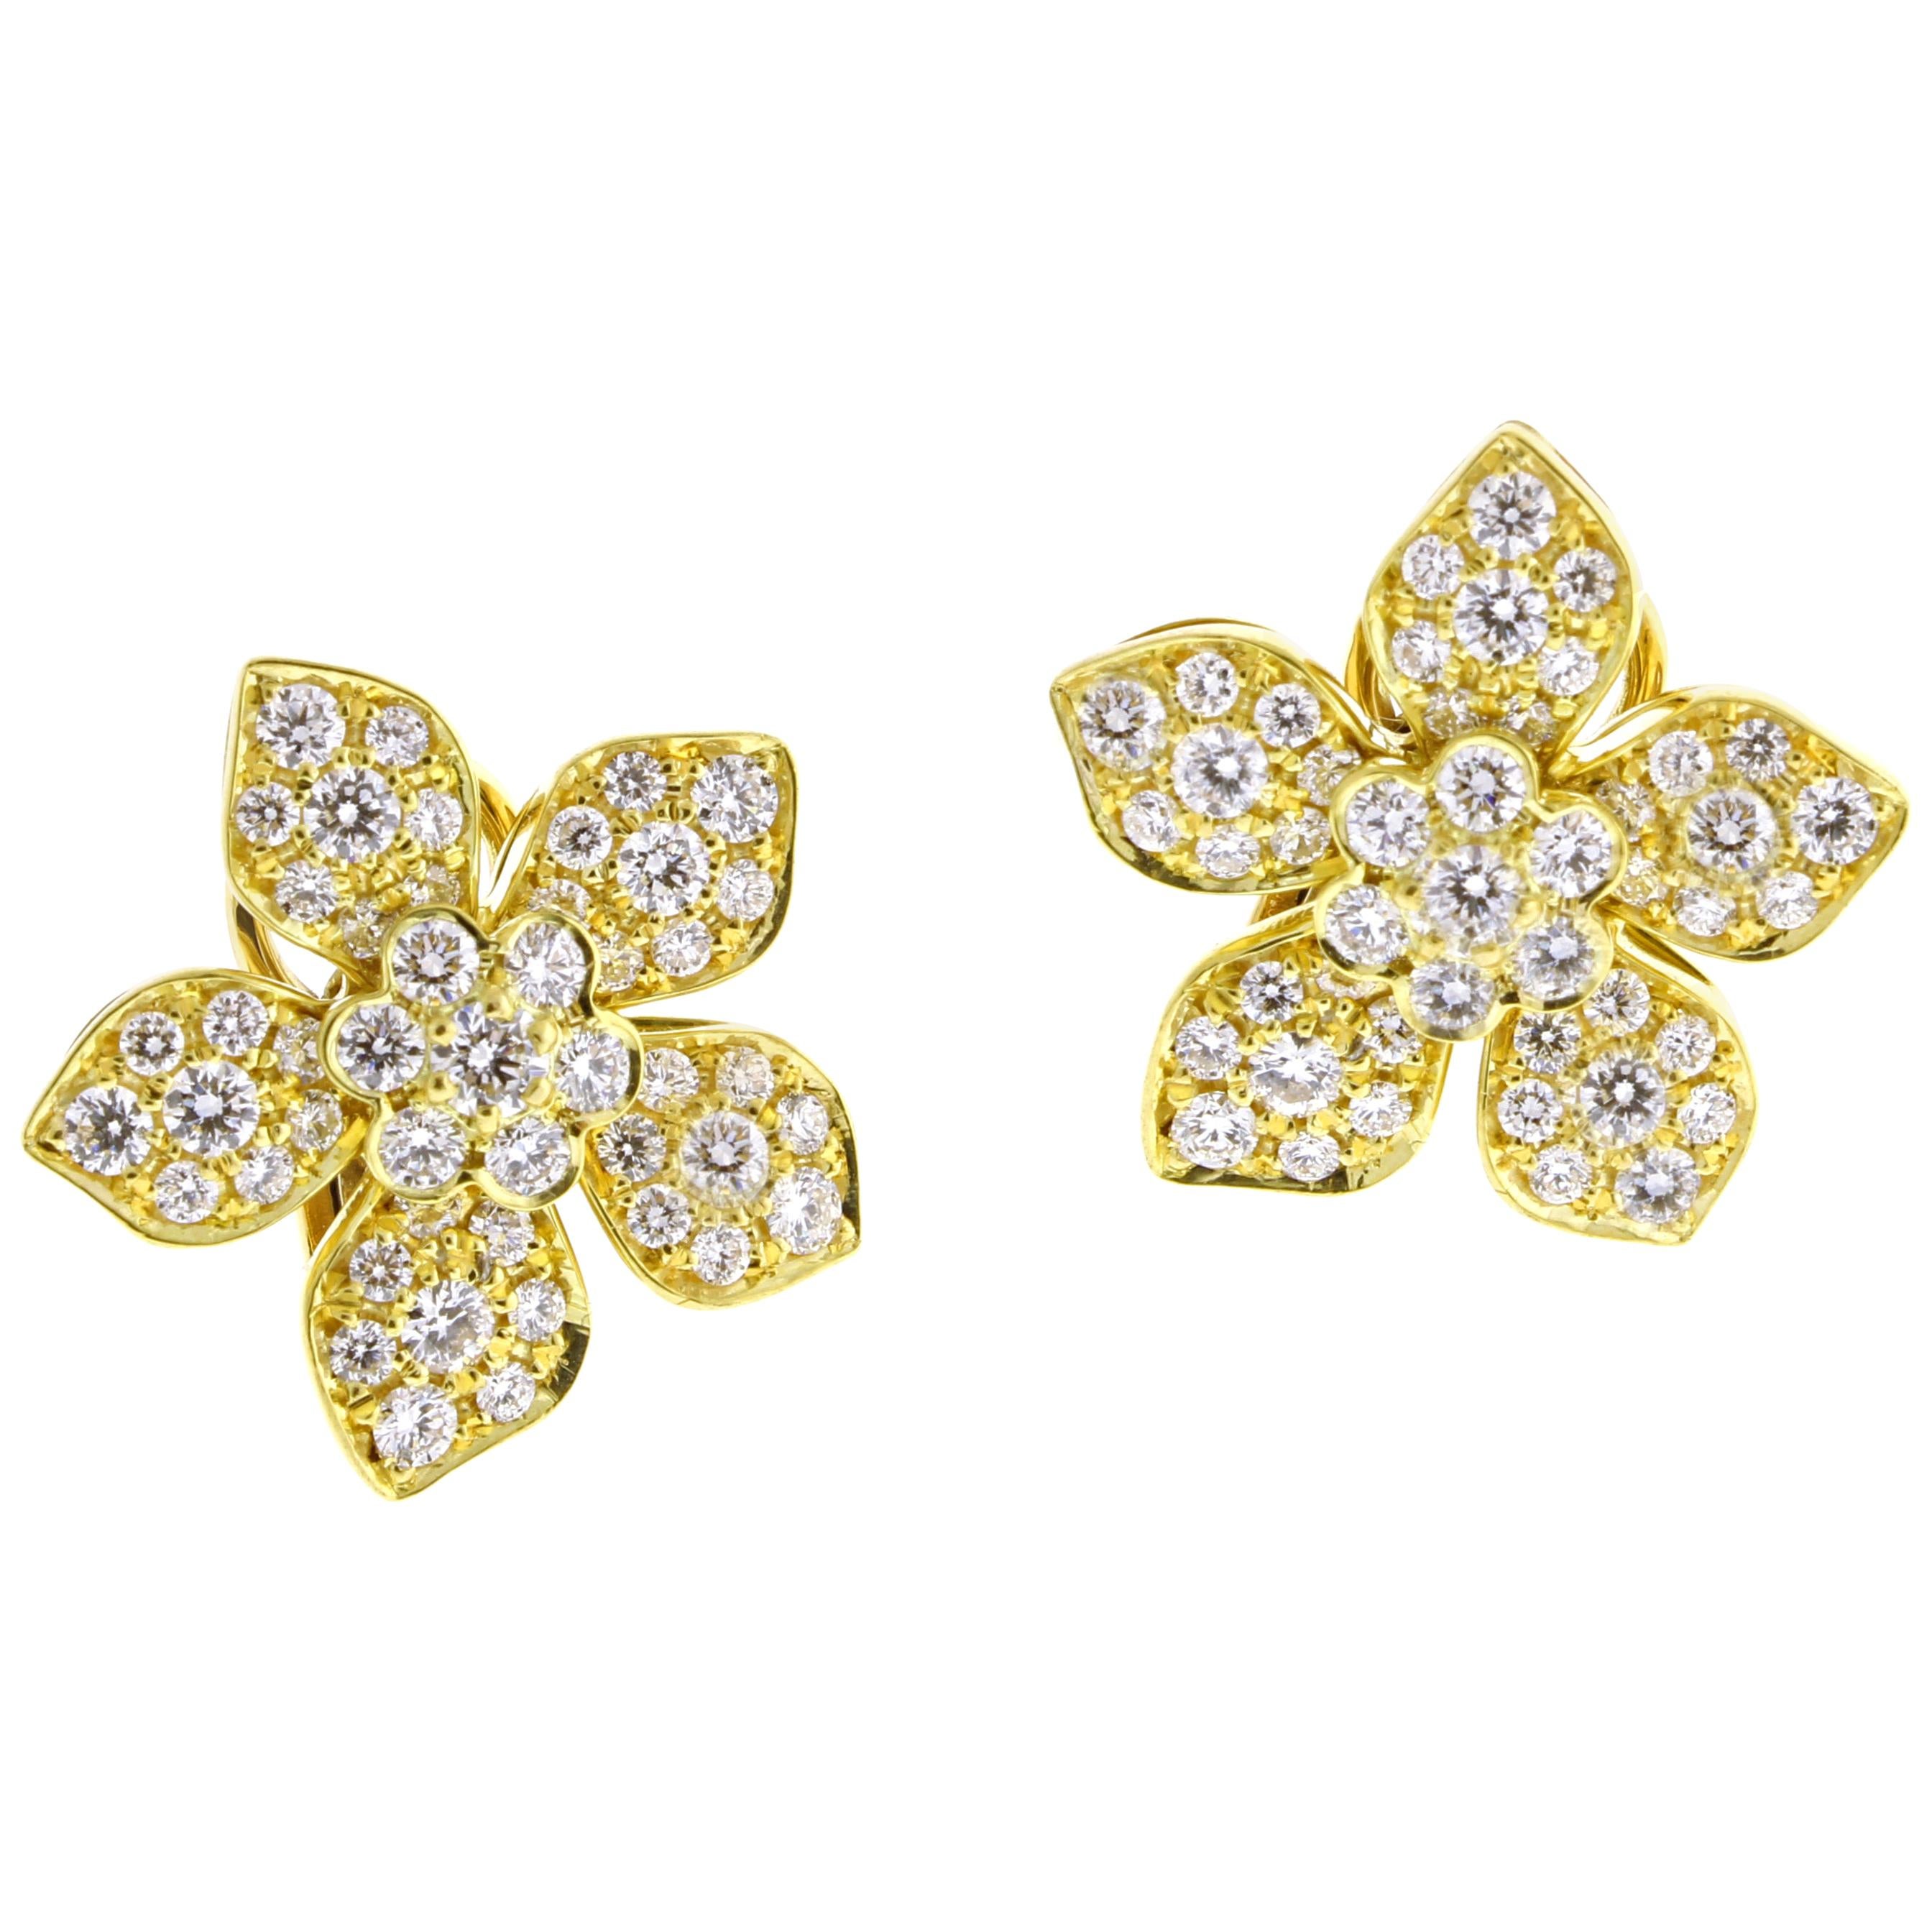 Diamond Flower Fiore Earrings by Pampillonia For Sale